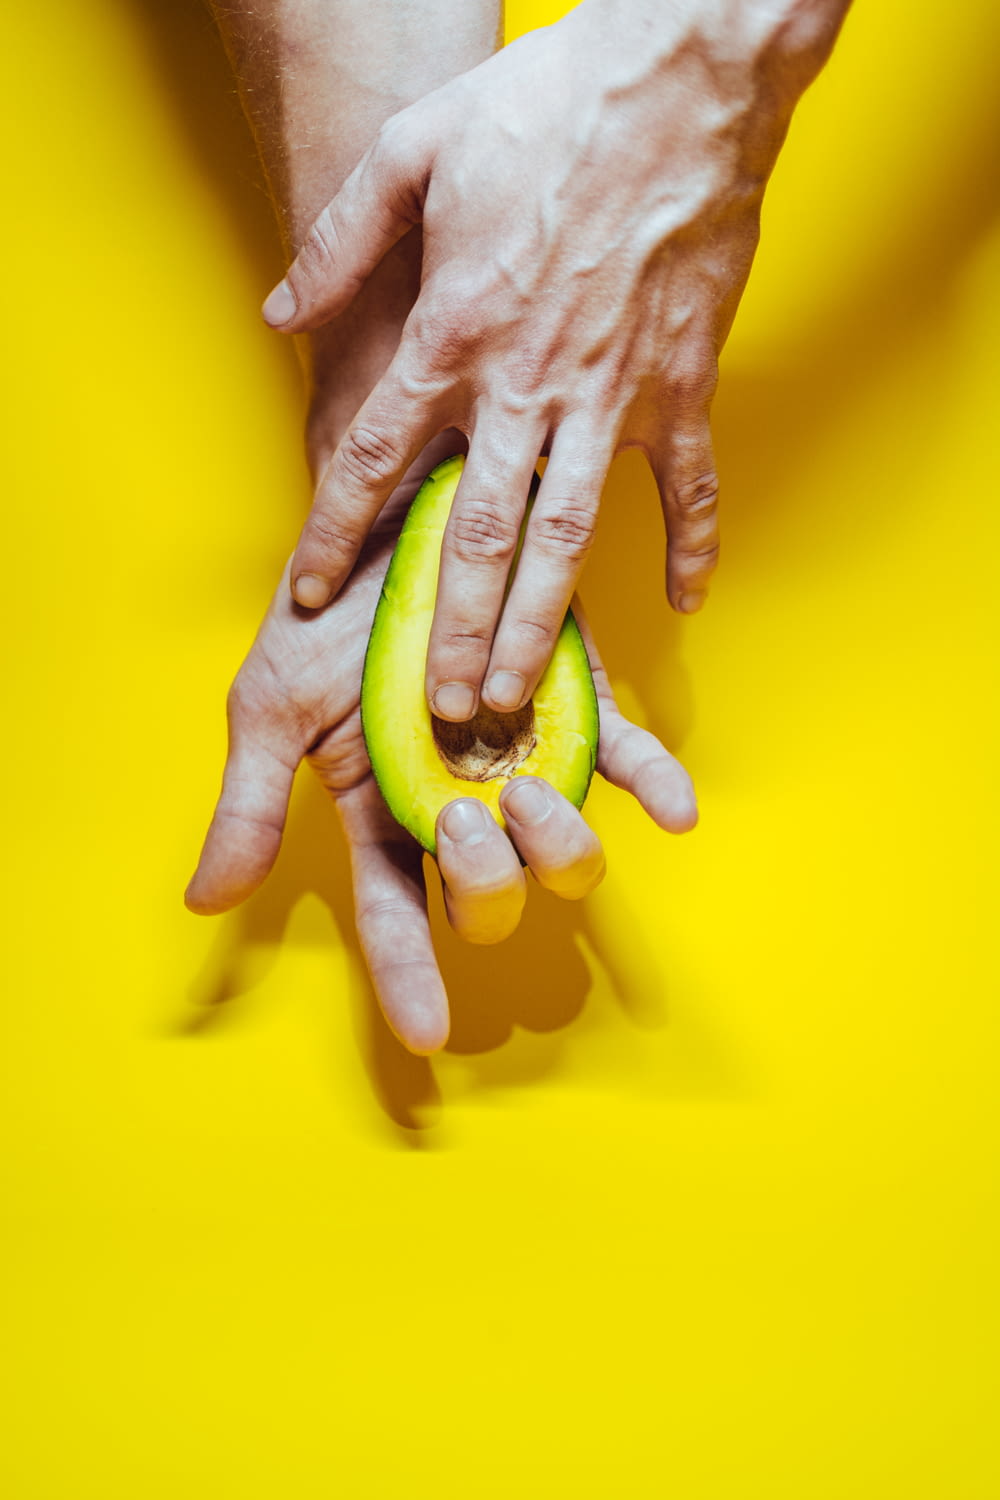 persons hand on yellow surface